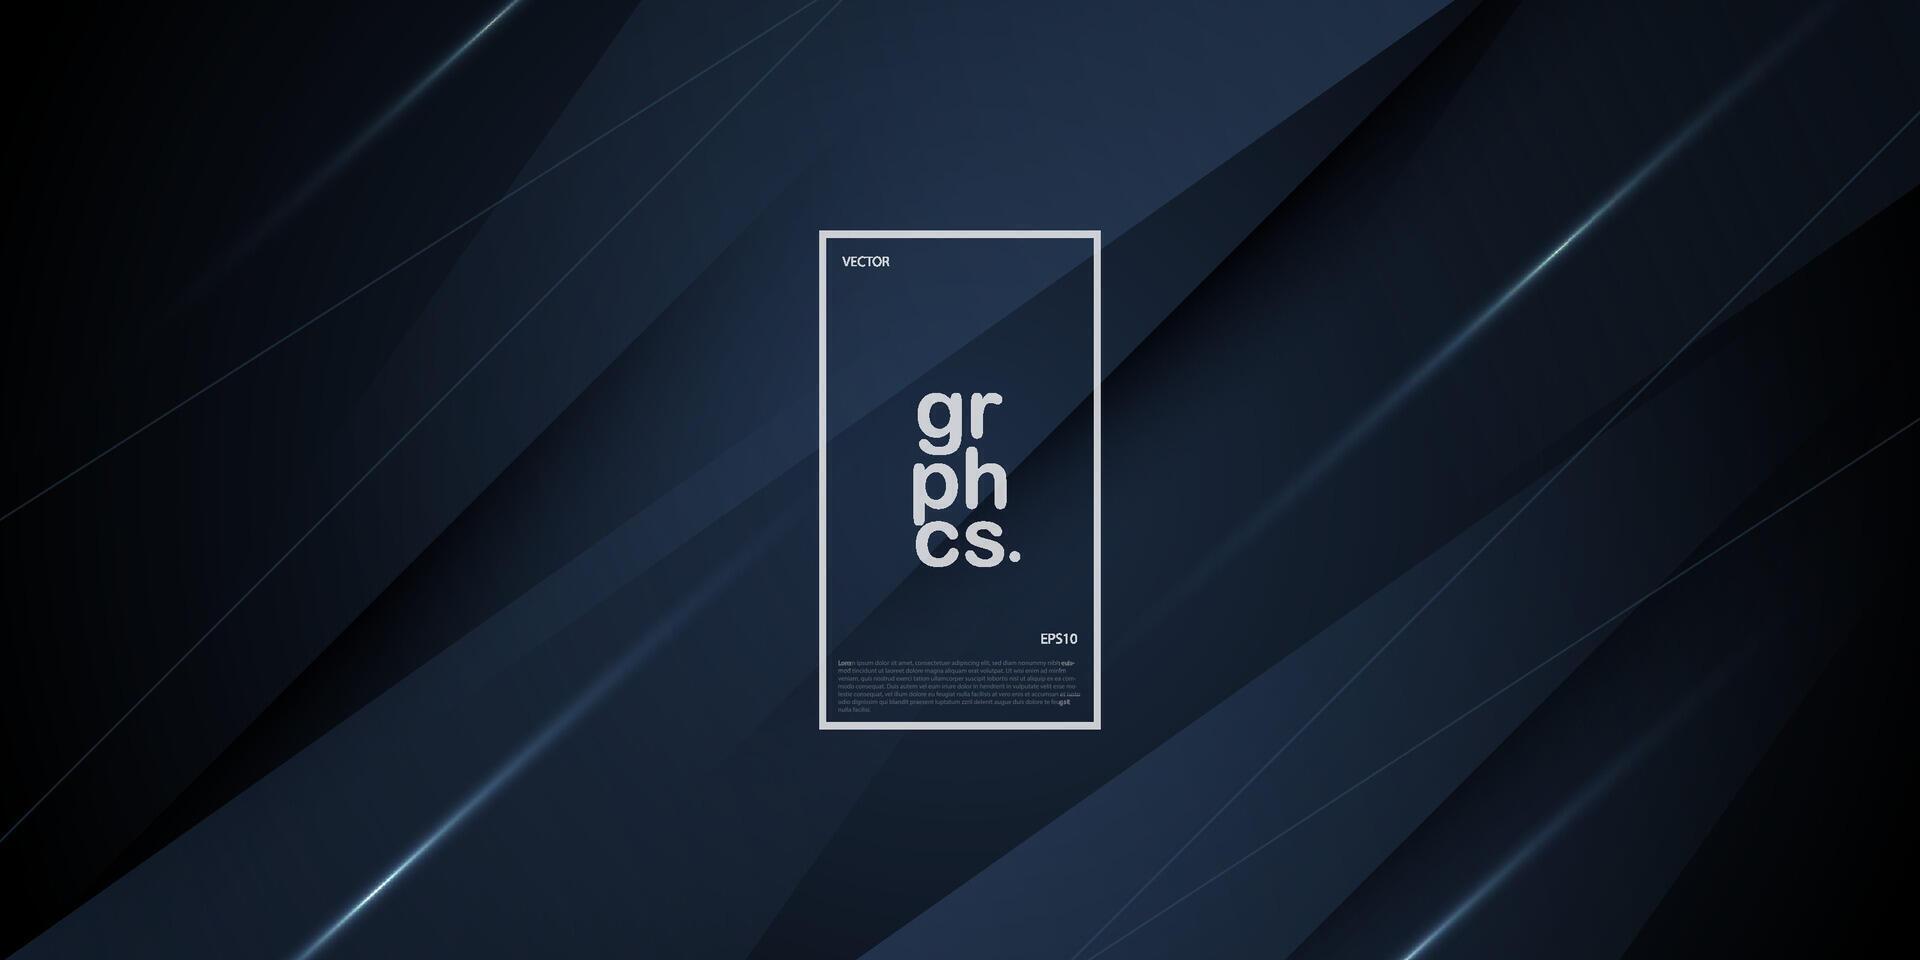 Abstract dark blue background with shadows and simple lines. looks 3d with additional light. suitable for posters, brochures, e-sports and others. Eps10 vector